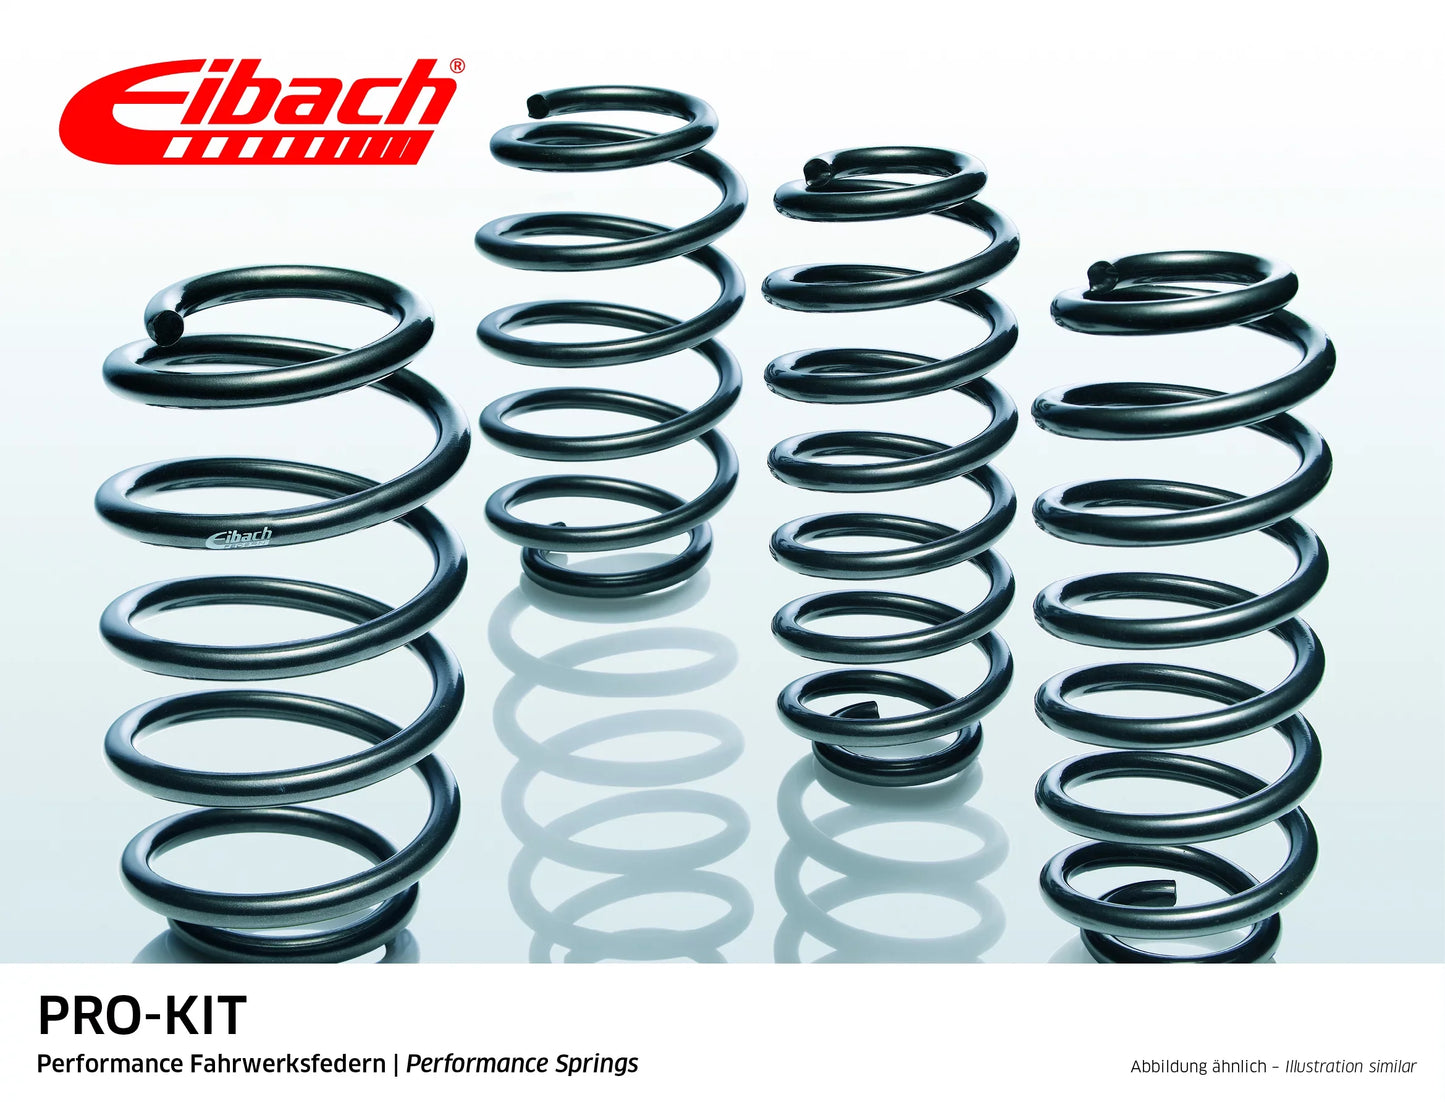 Eibach Pro-Kit Lowering Springs (E1538-140) at £270.84